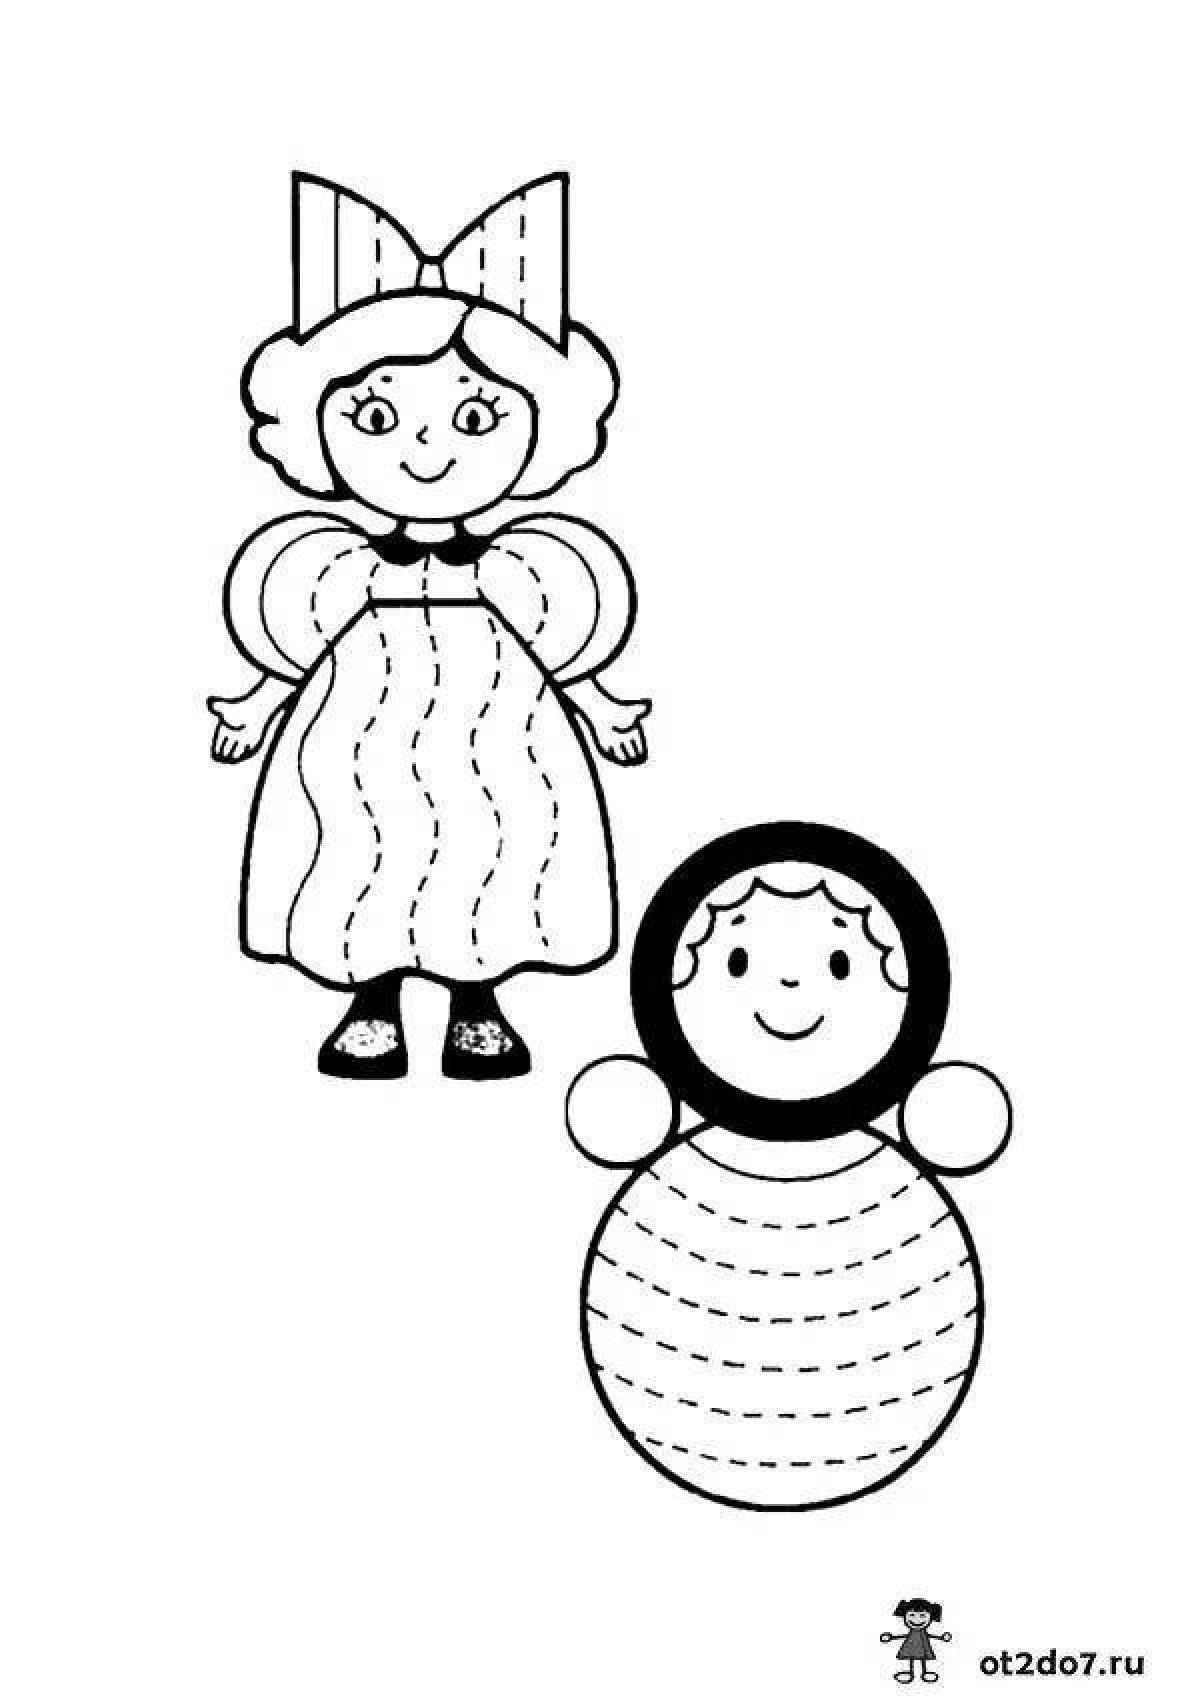 Colorful hatching coloring page